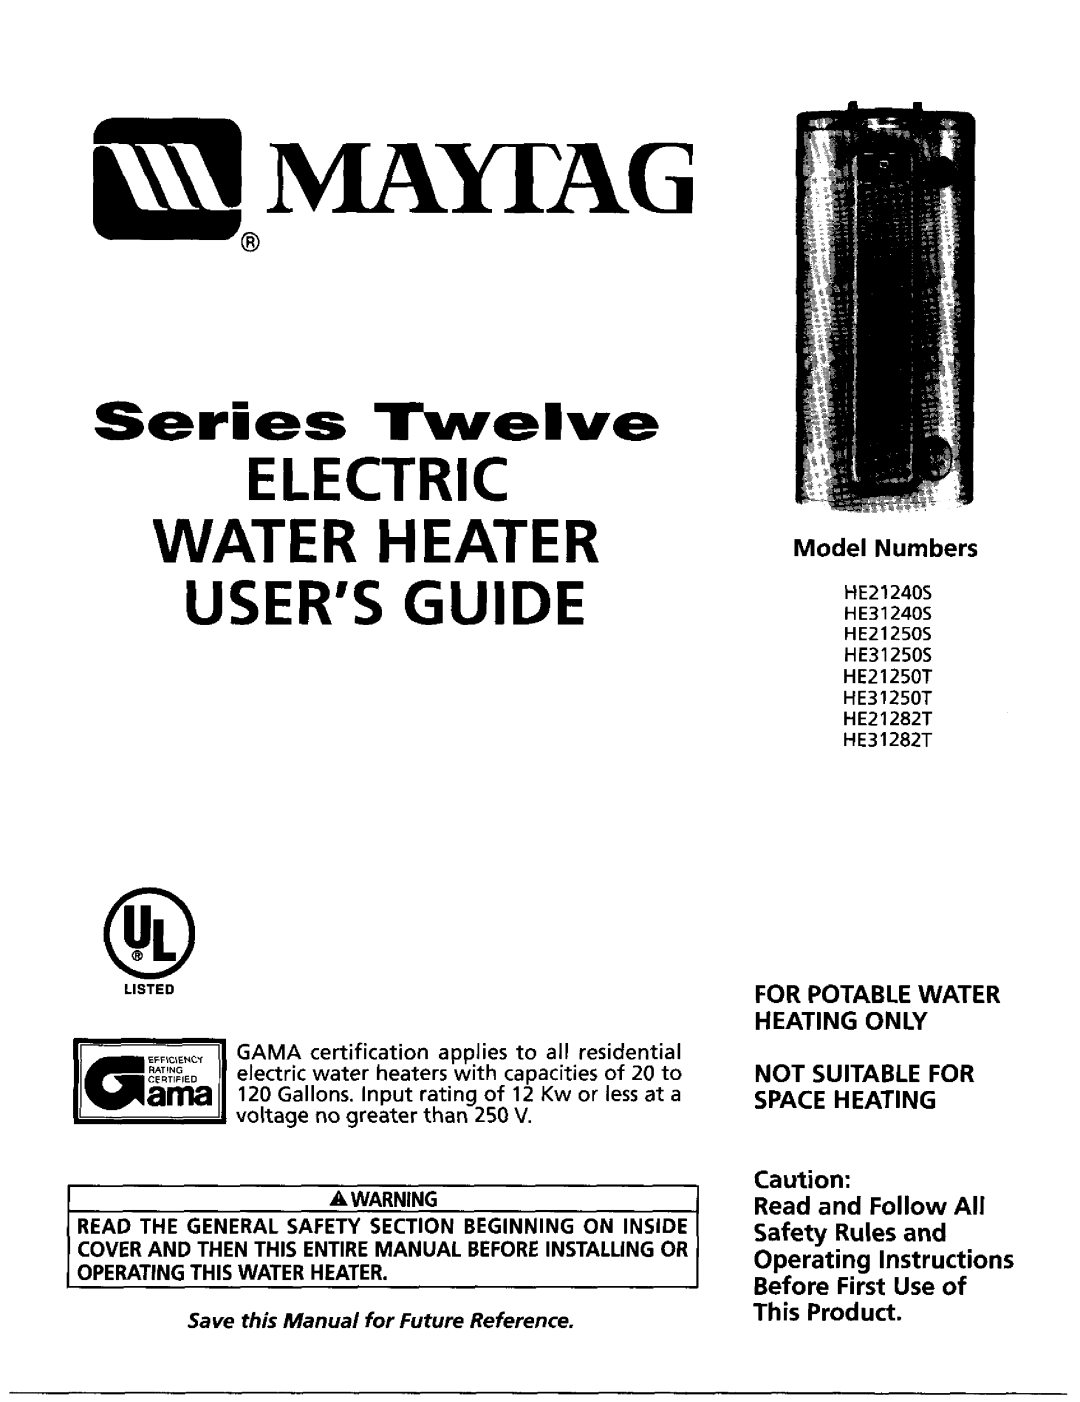 Maytag HE31250S operating instructions Twelve, Spaceheating, Operating Instructions I Safety Rules and, Model Numbers 